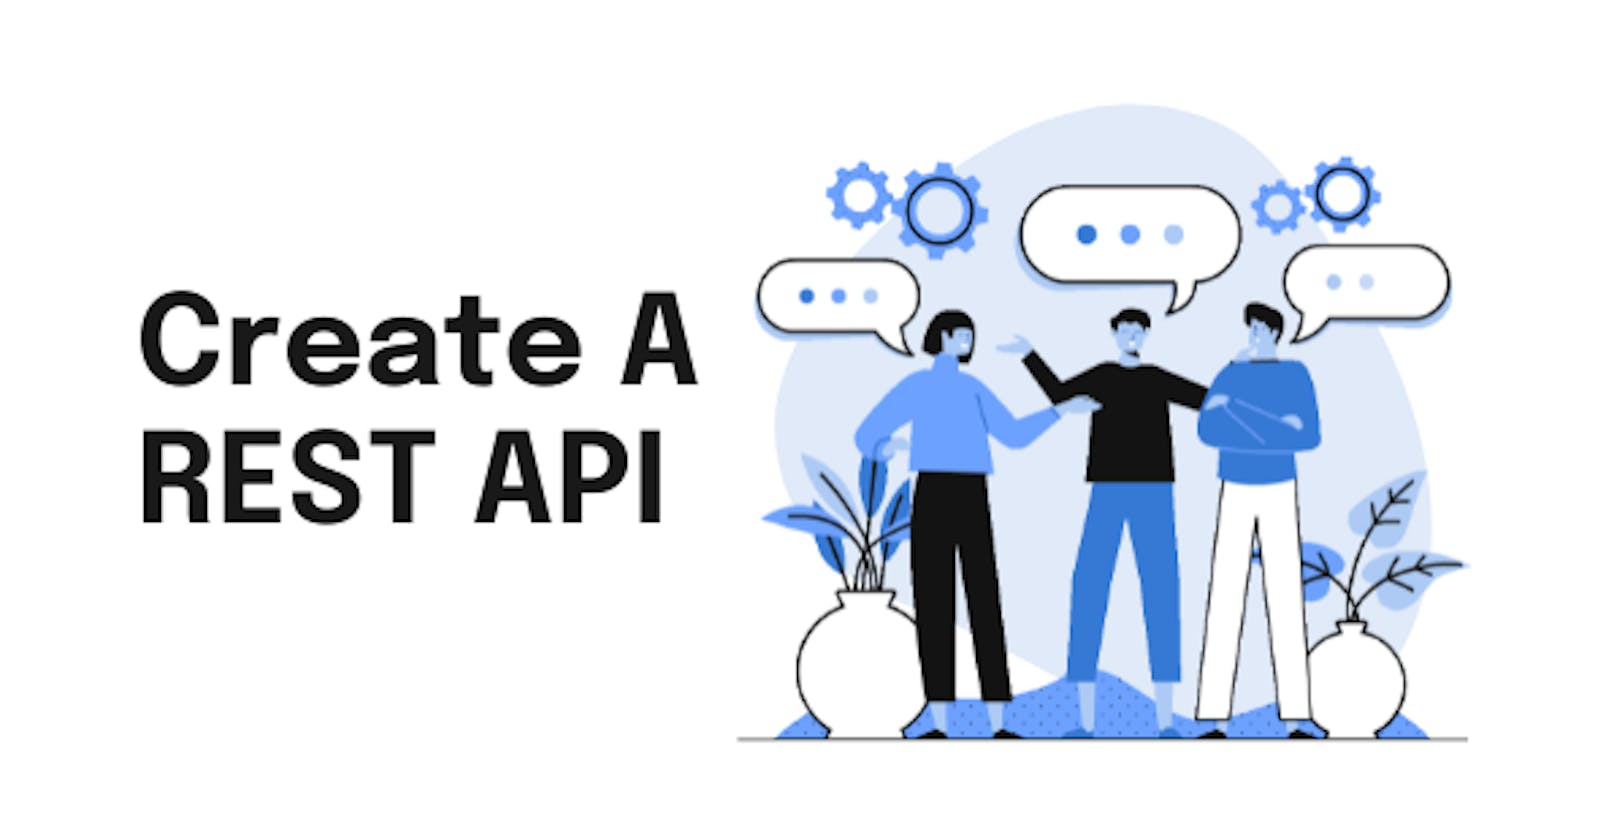 Creating a super productive REST API in 30 seconds 💪